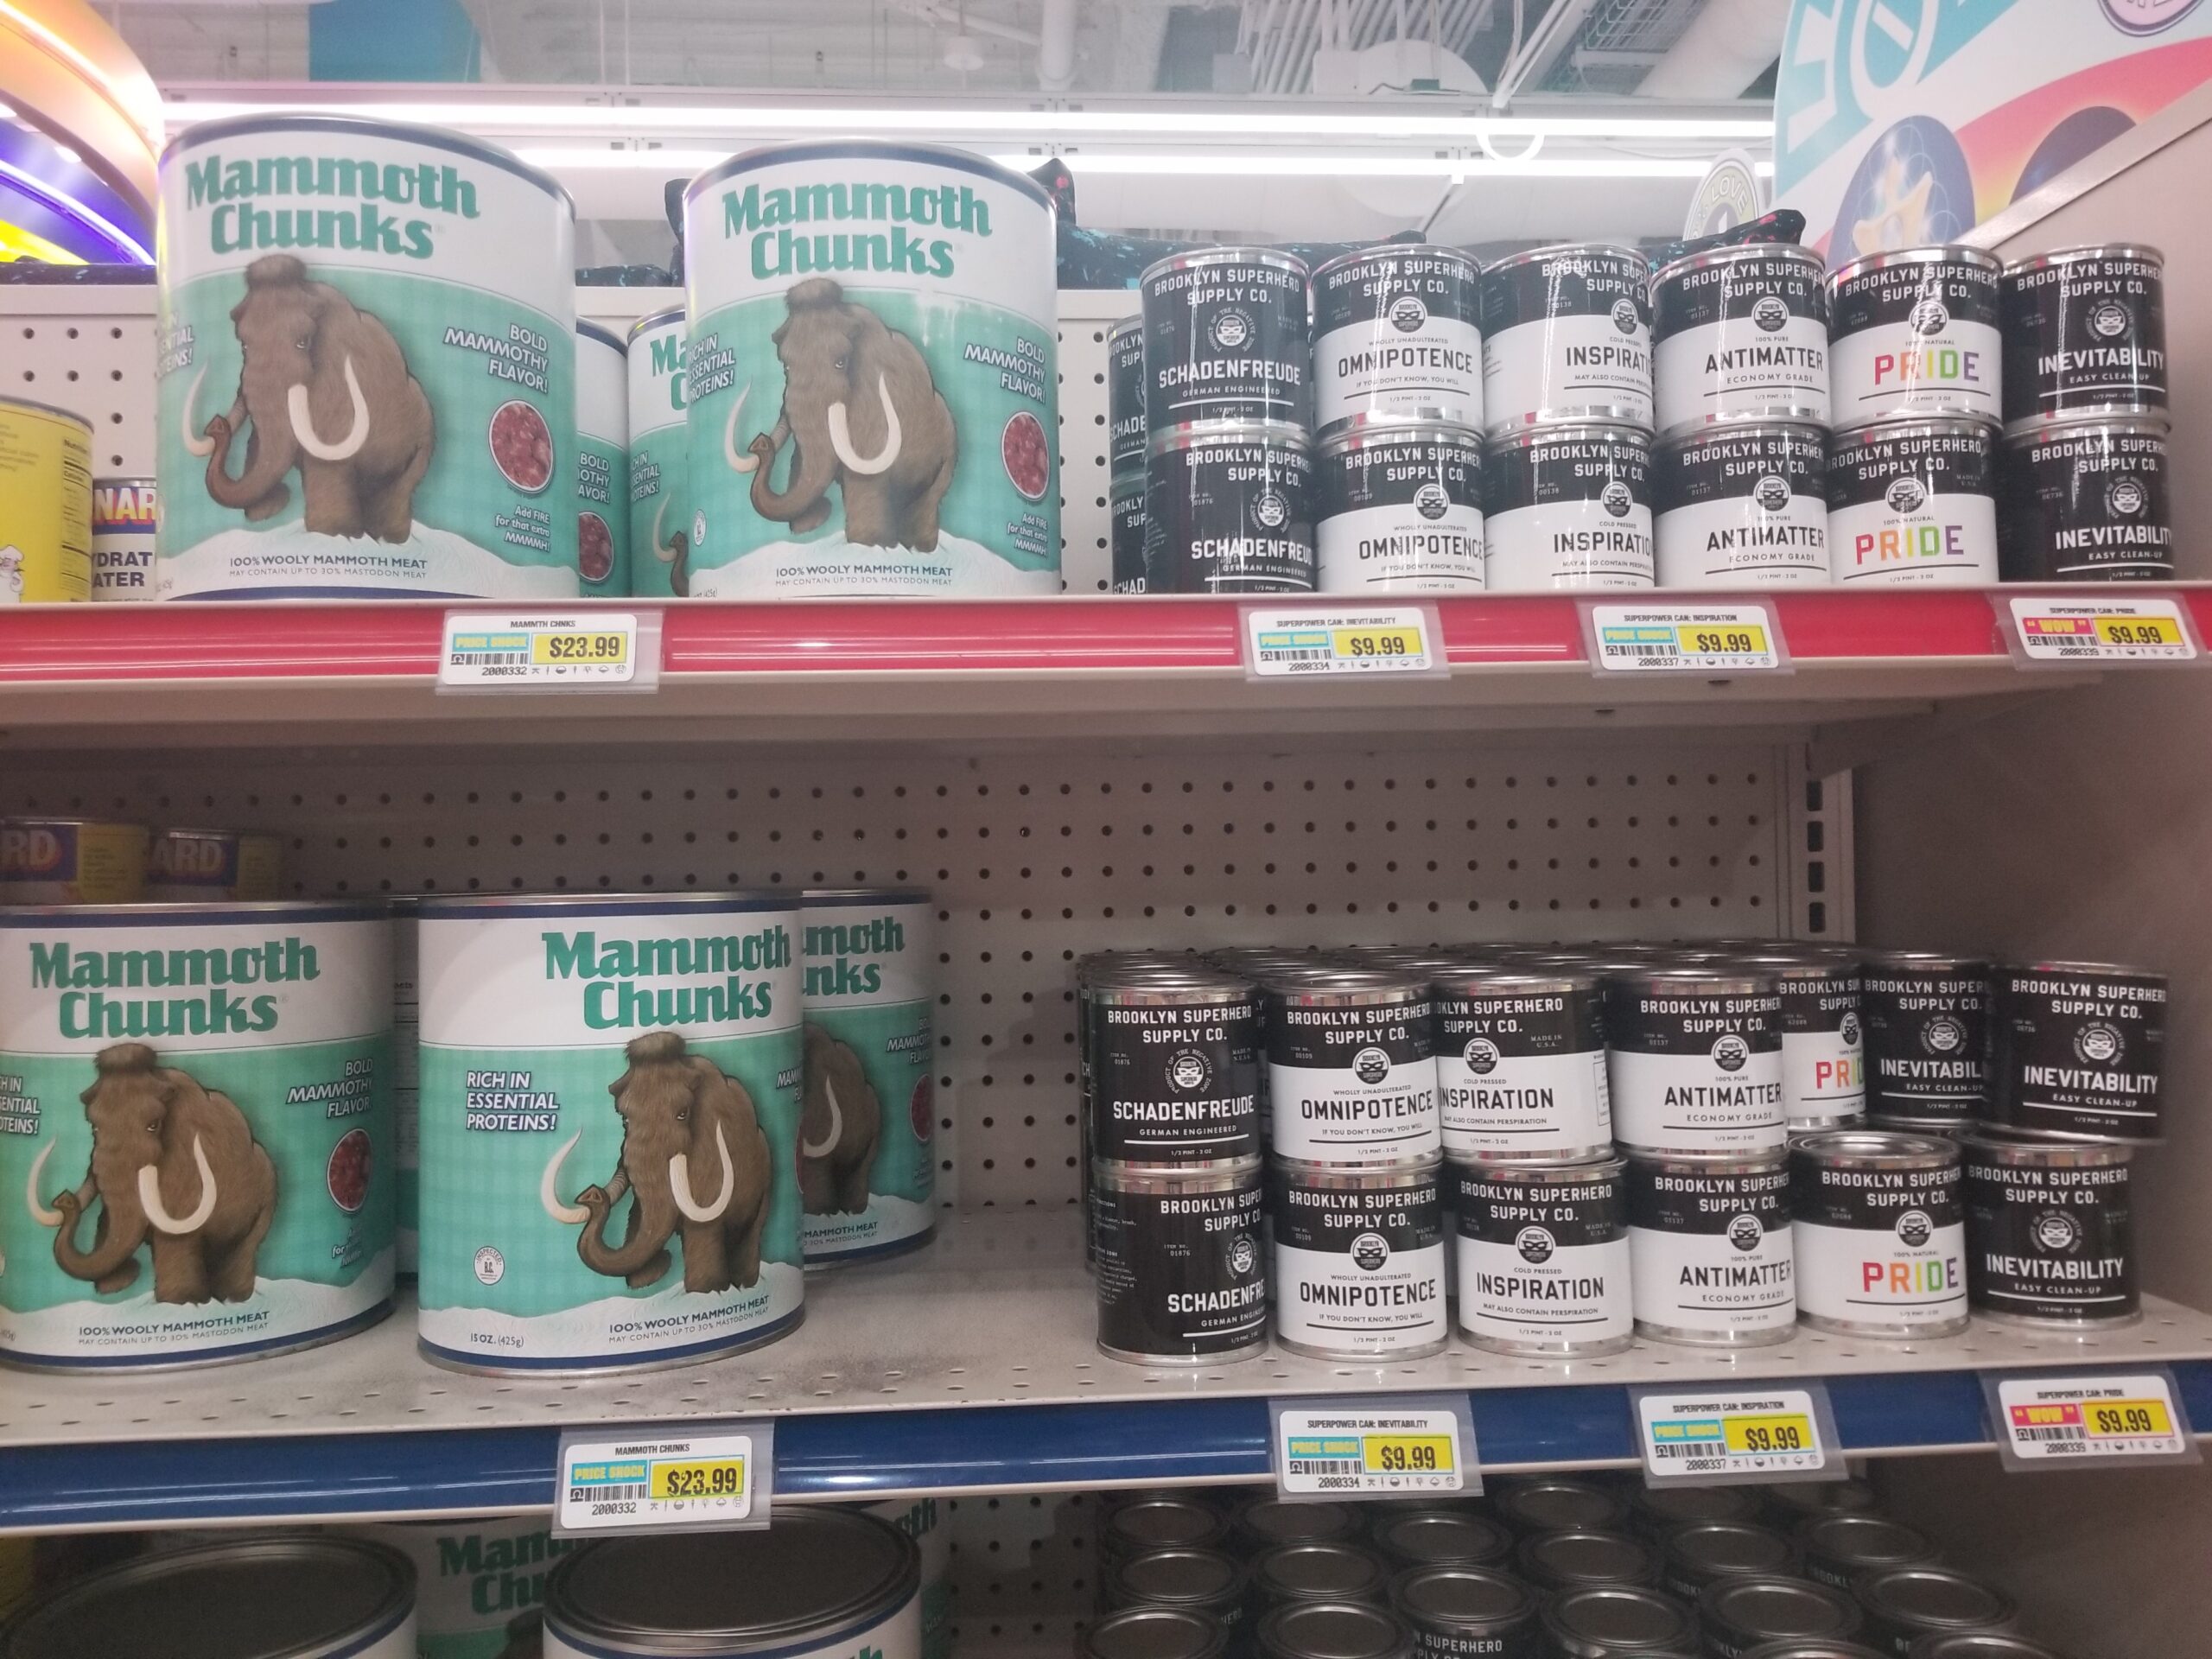 The image features products on a shelf in Omega Mart, an interactive art installation by Meow Wolf. One of the products is "canned mammoth."